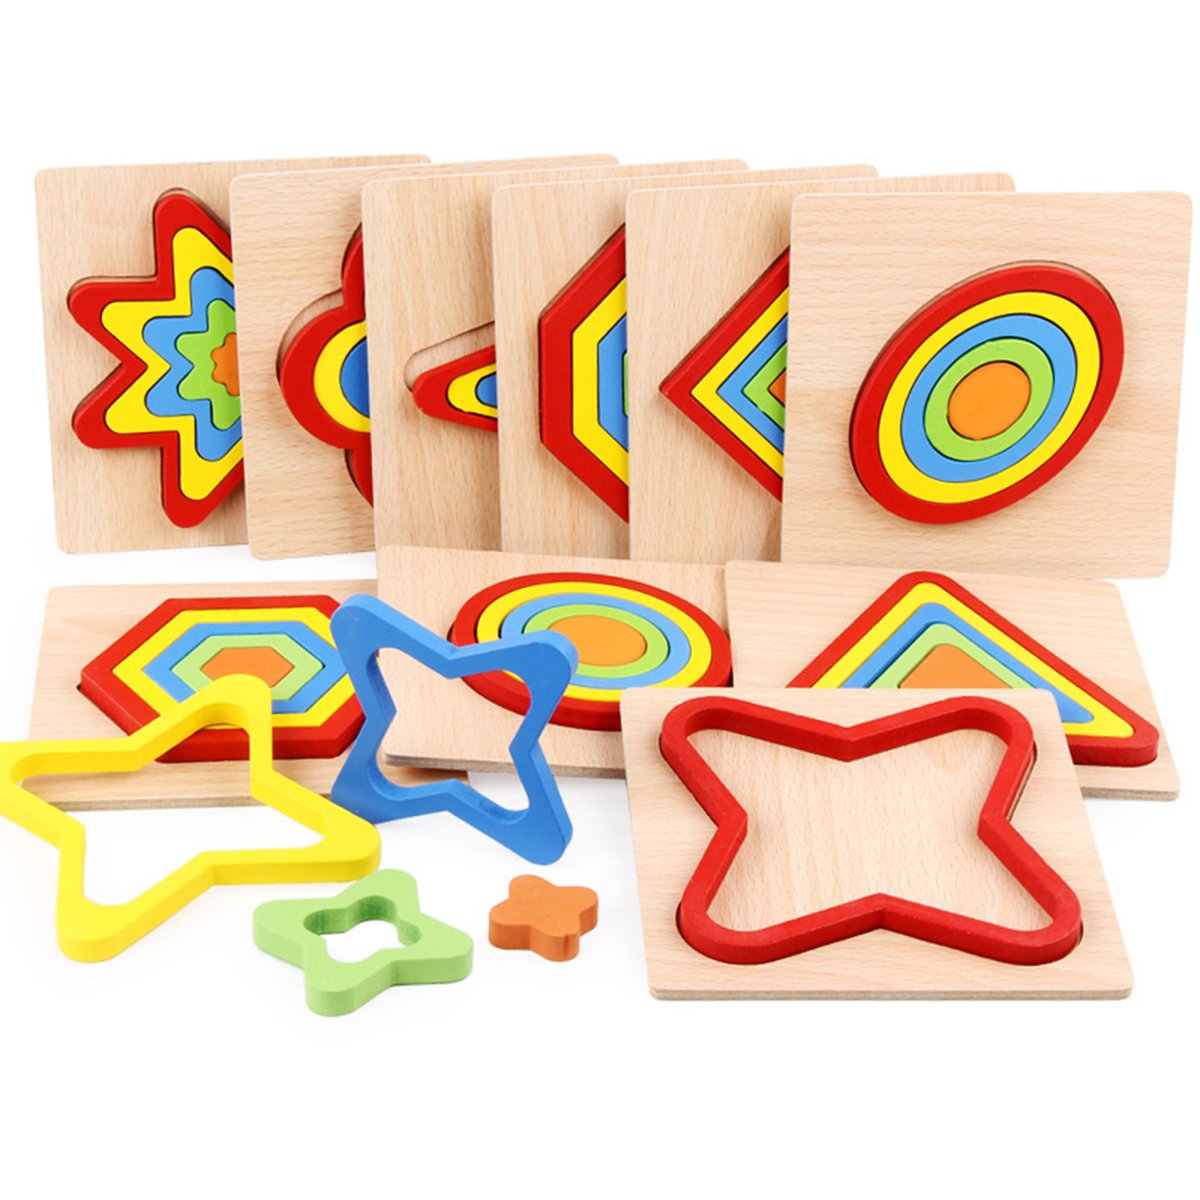 Shape Cognition Board Geometry Jigsaw Puzzle Wooden Kids Educational Learning Toys 2